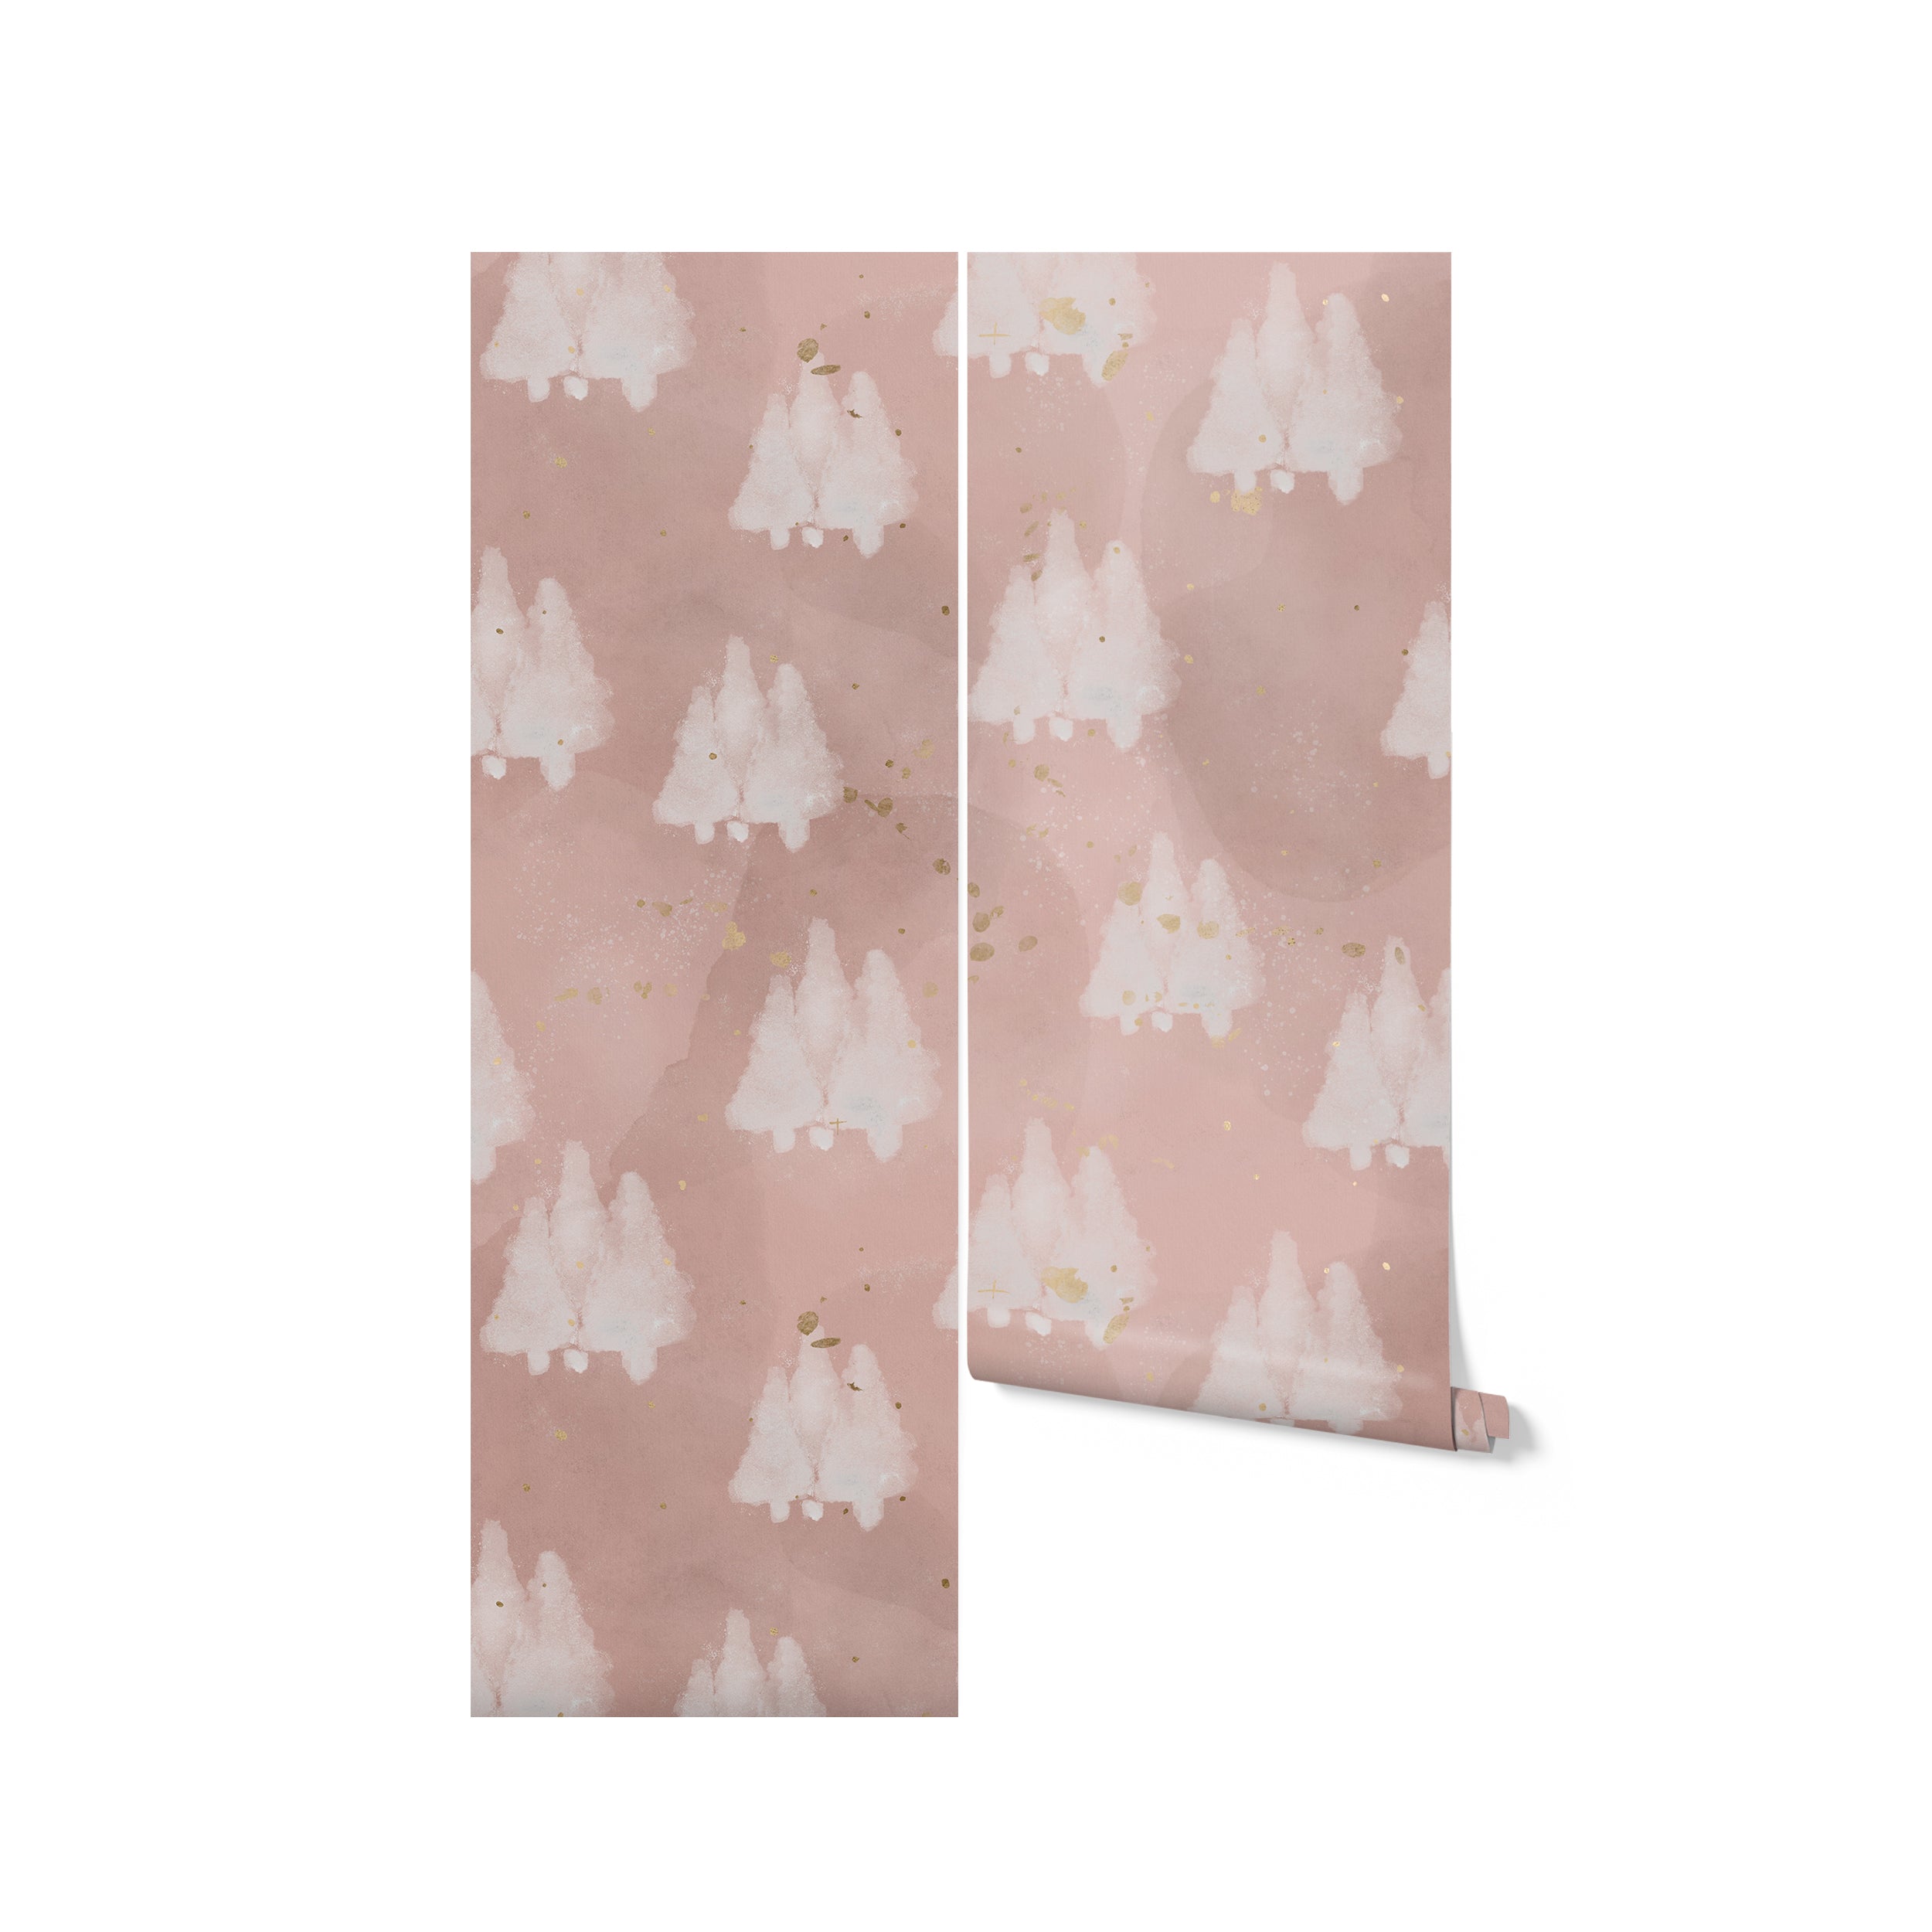 Rolls of Shimmer Tree Wallpaper - Pink showing the gentle and artistic design of white trees on a muted pink background, embellished with golden sparkles that add a touch of elegance and whimsy. This wallpaper is perfect for creating a soothing and captivating environment in any room